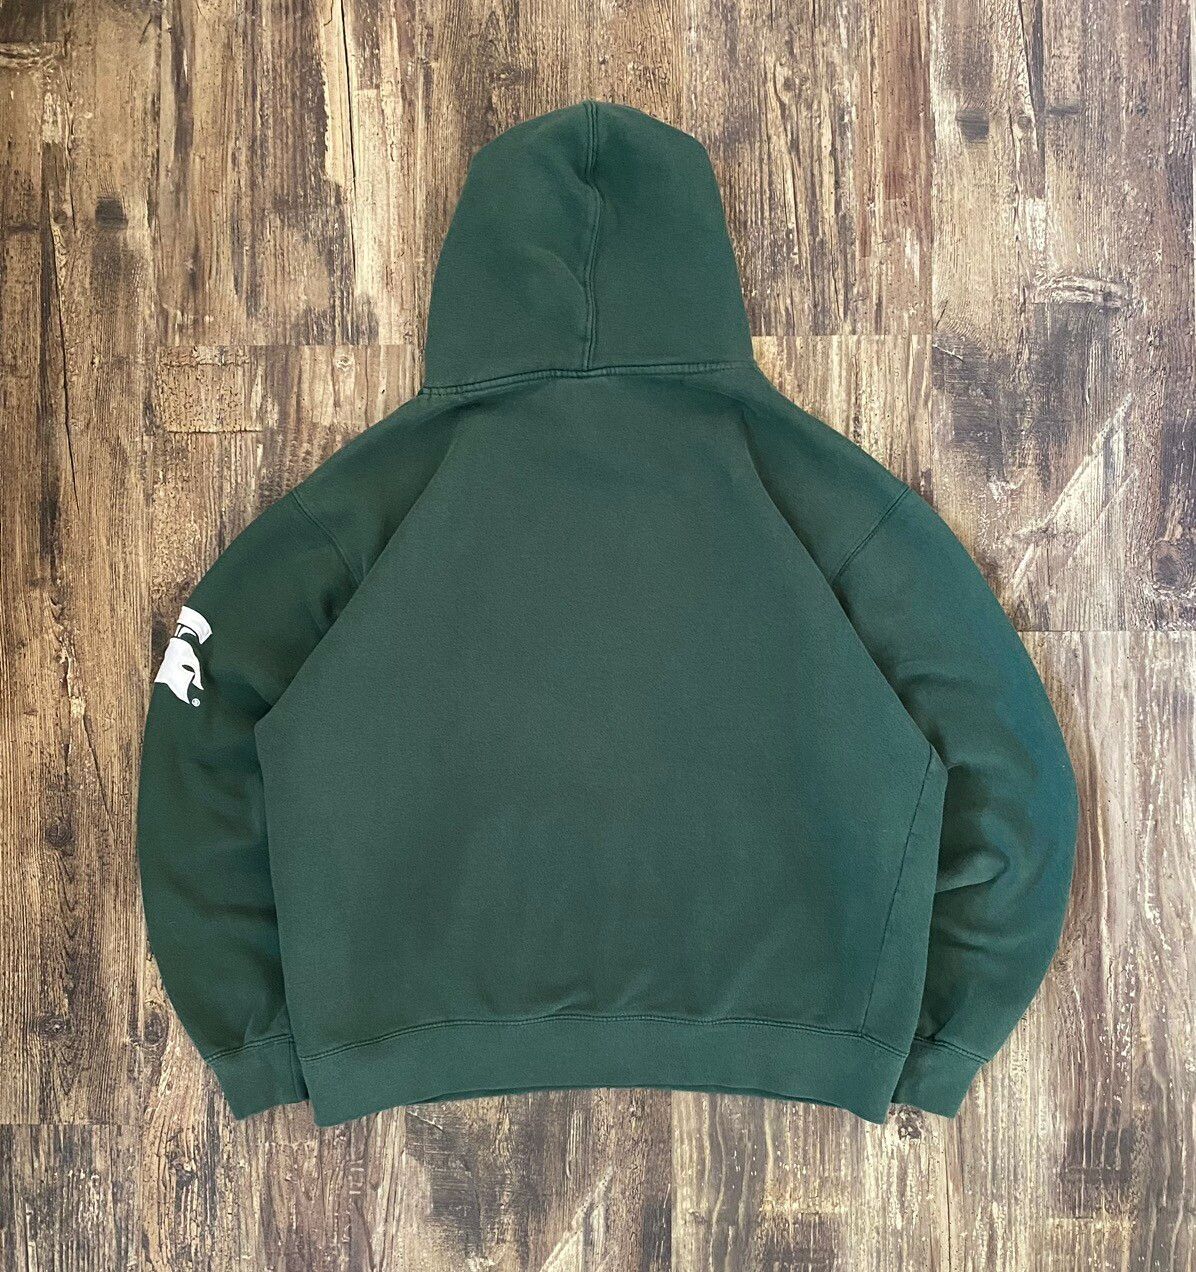 Vintage Y2K 2000s Faded Michigan State Spartans Spellout Hoodie Size US S / EU 44-46 / 1 - 2 Preview